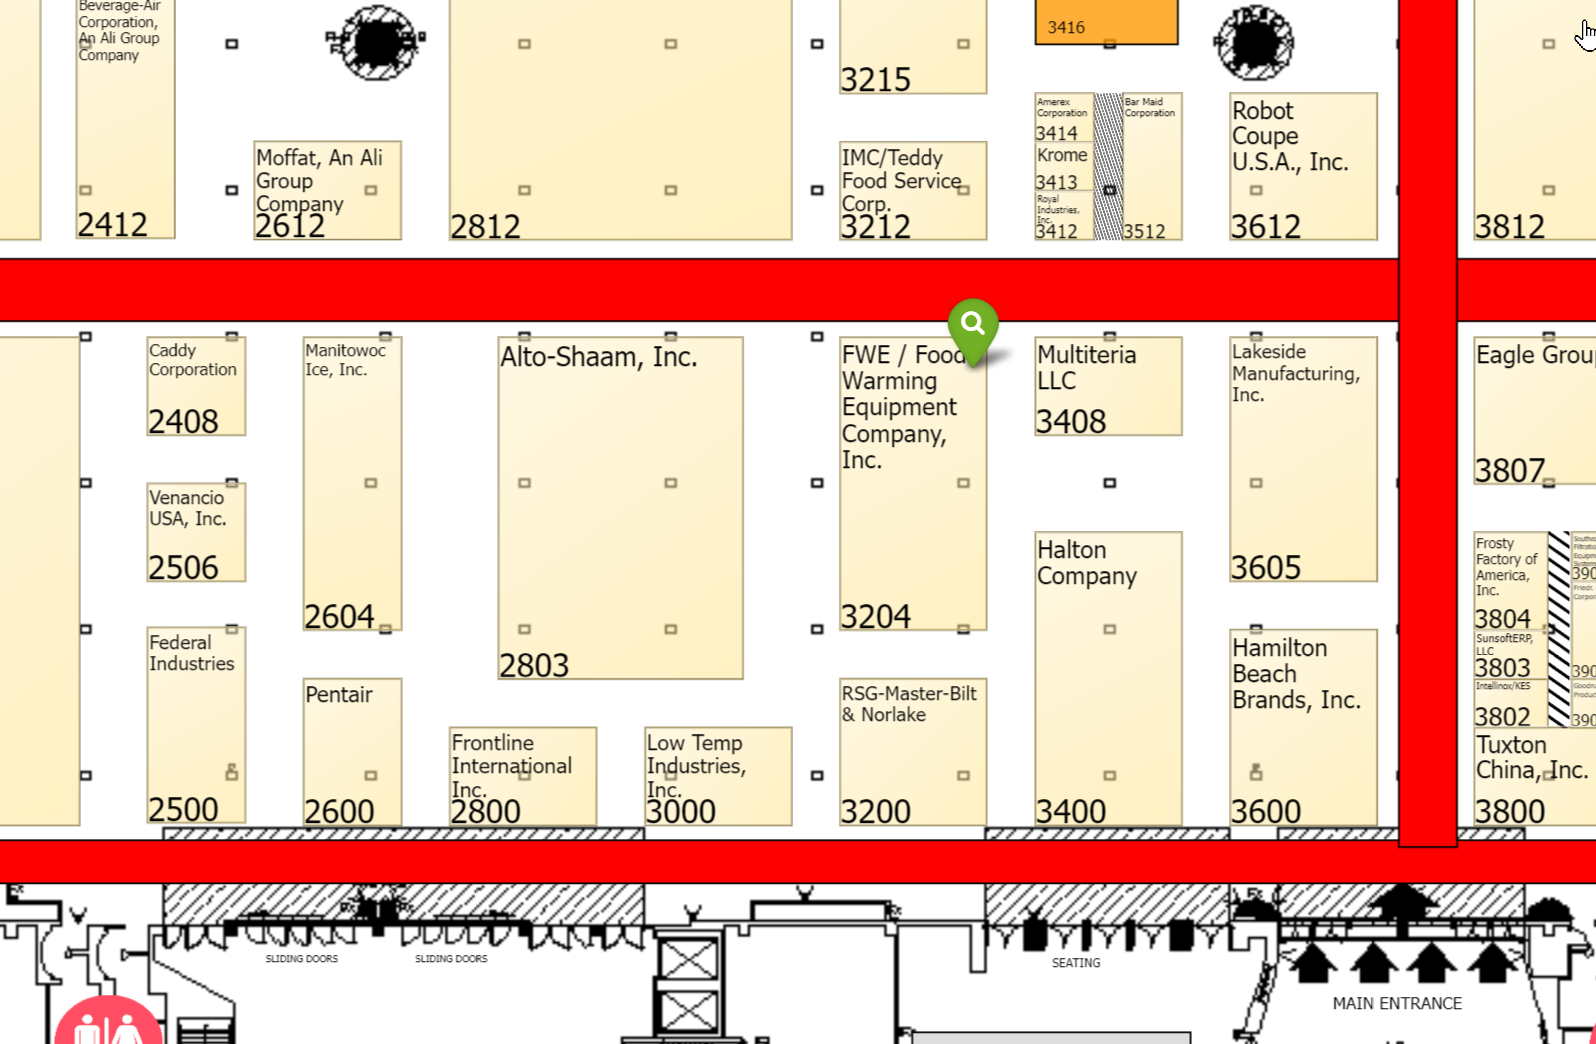 FWE is located at Booth # 3204